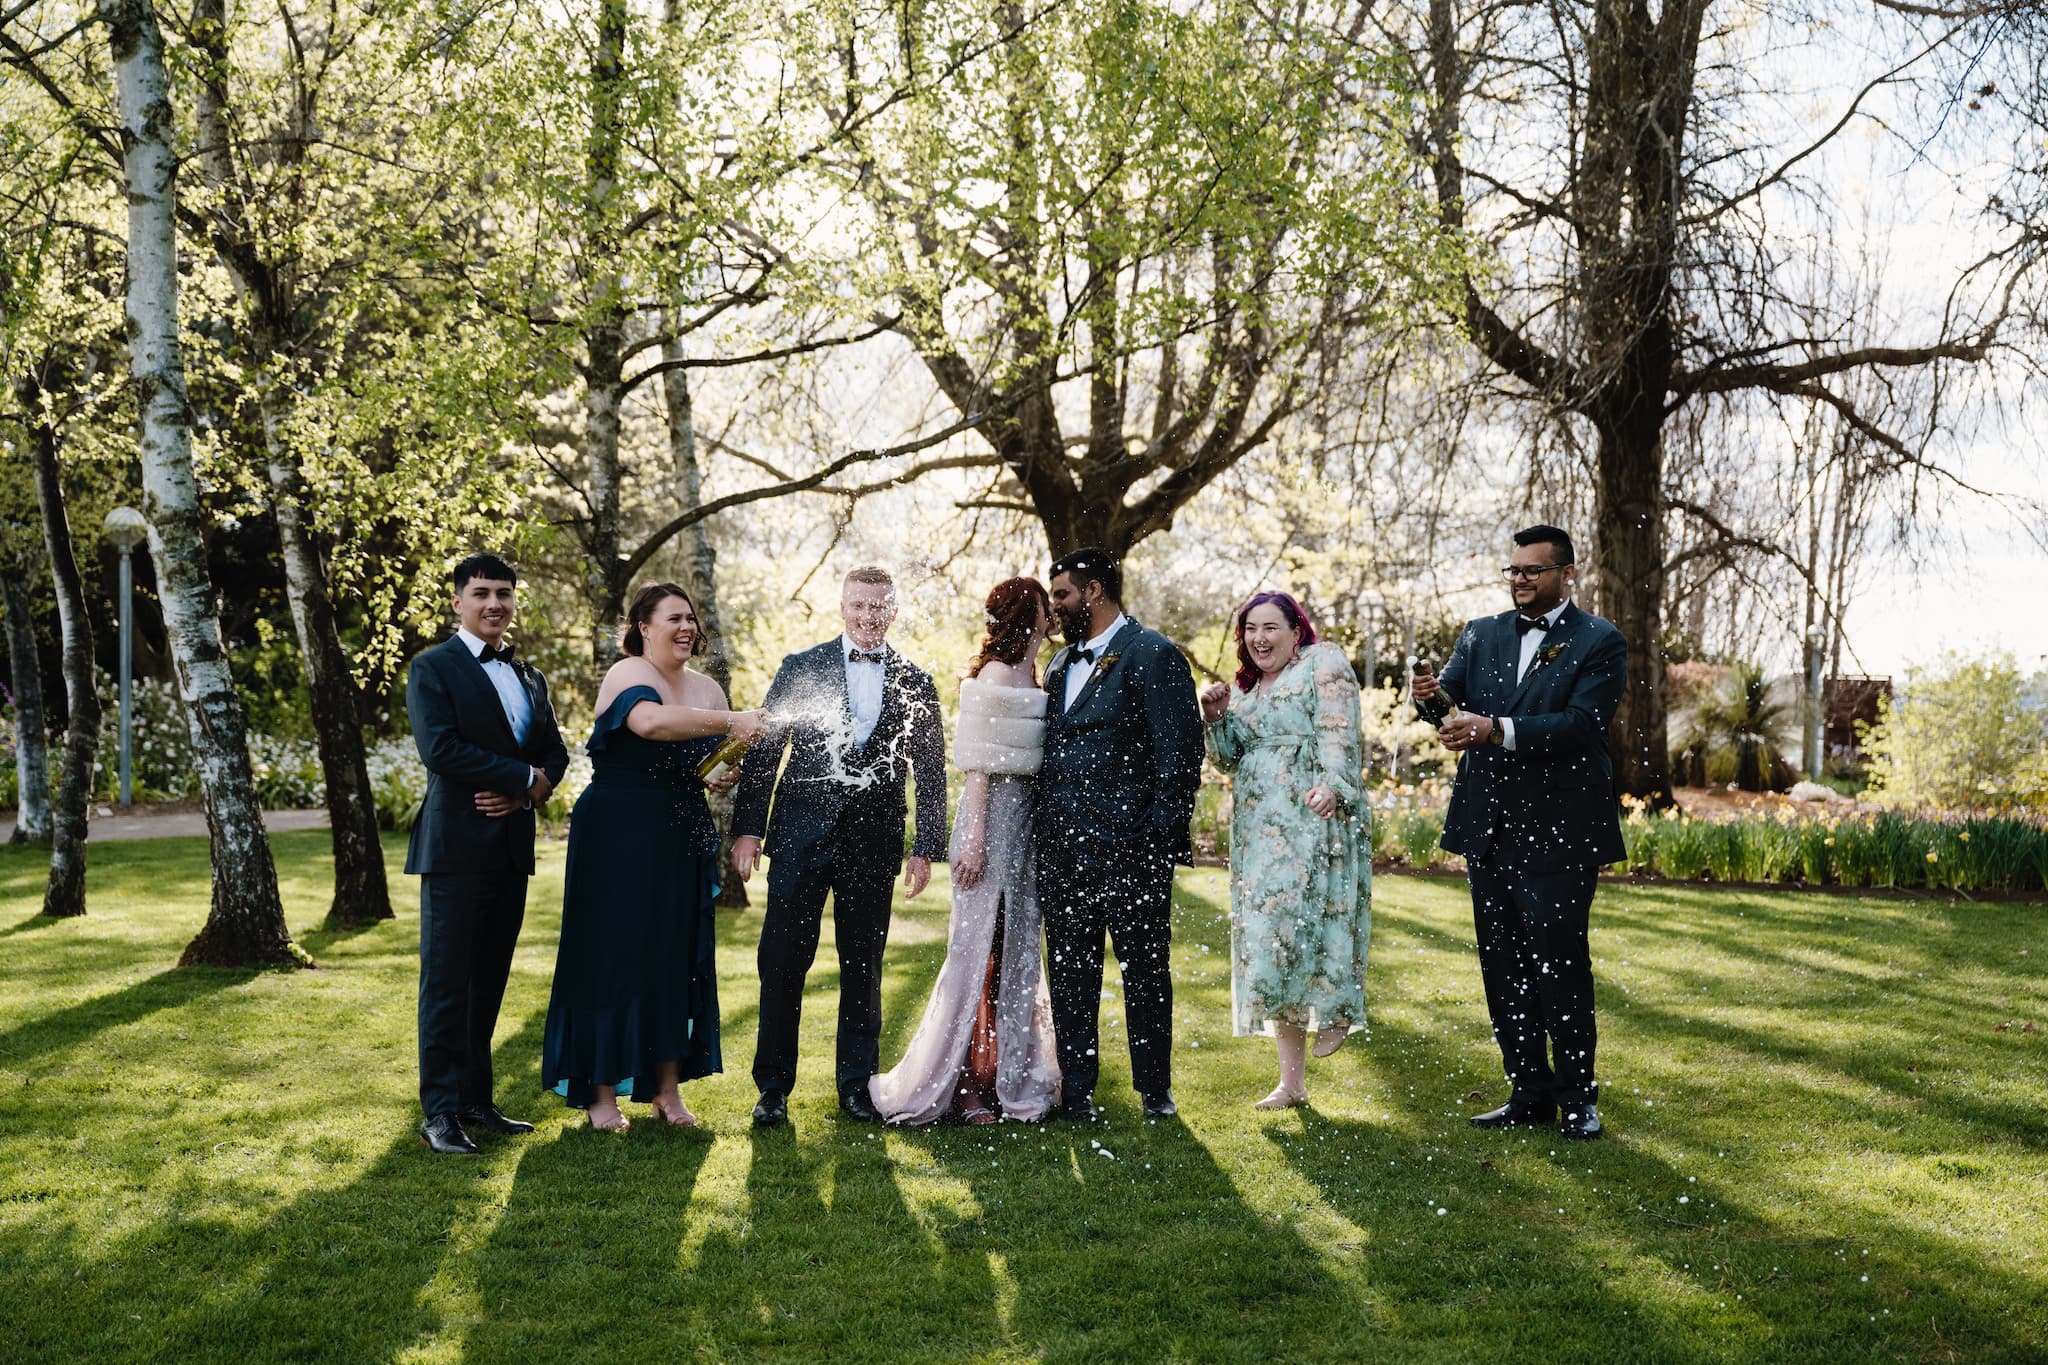 A Cherished Day at the Botanical Gardens - Maddy & Ash's Wedding